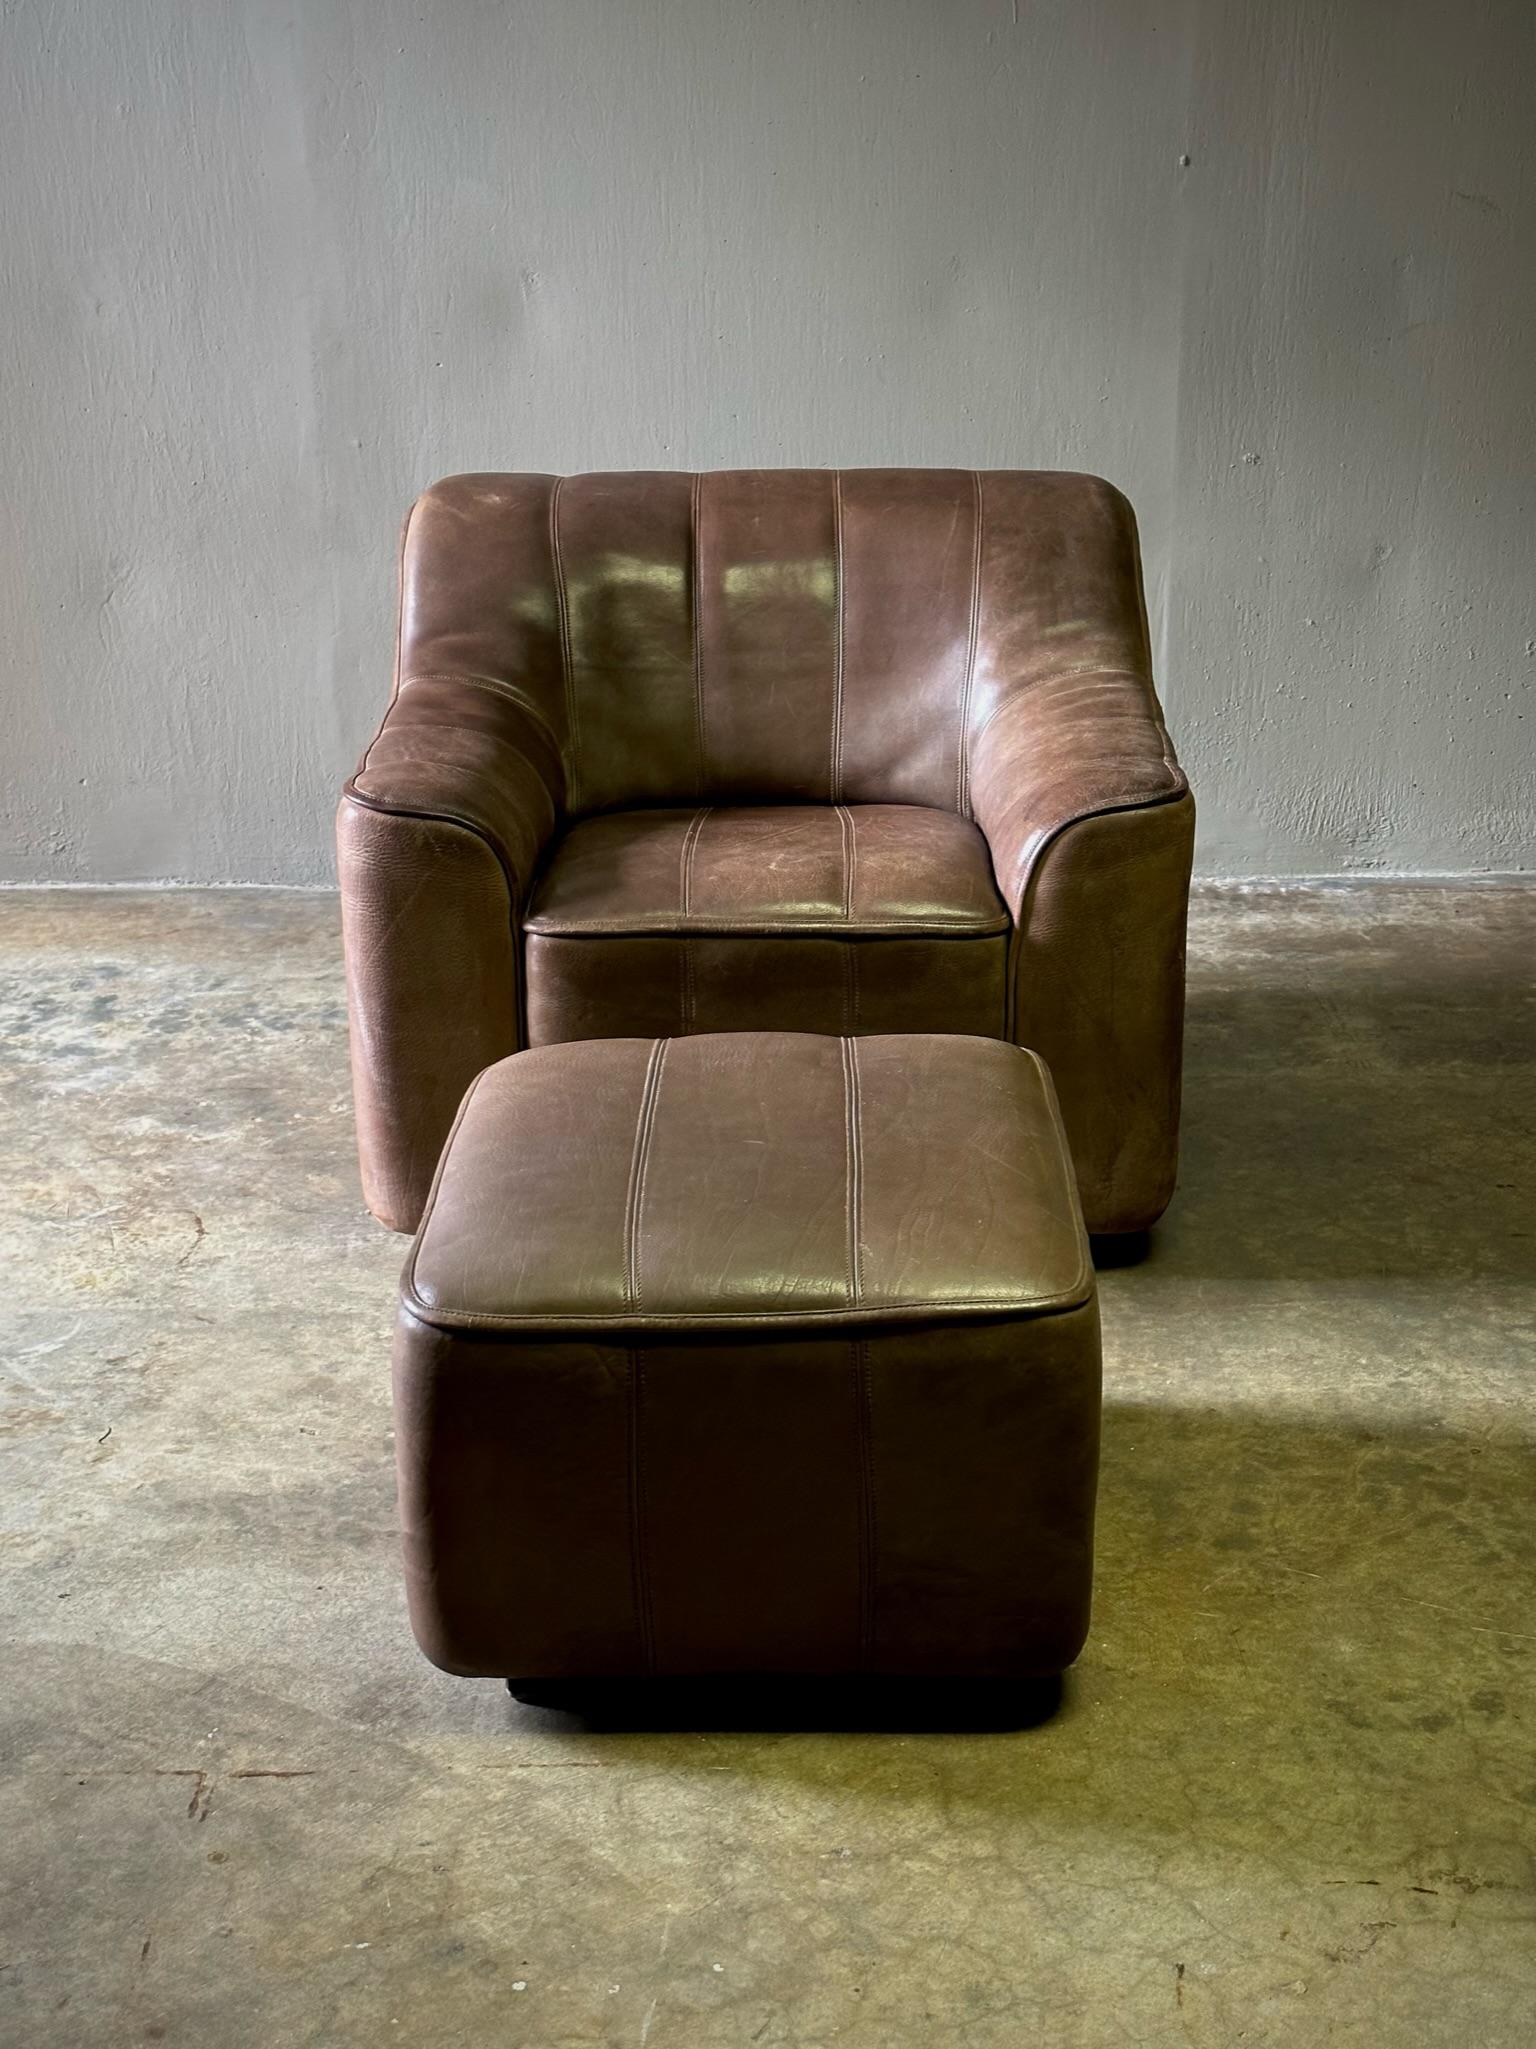 Dark chocolate brown leather armchair and ottoman by De Sede. Sumptuous yet understated with handsome, timeless appeal. The patina on the leather is exquisite.

Switzerland, circa 1970

Dimensions: Chair 34W x 34D x 28H ;Ottoman 21W x 23D x 15H
